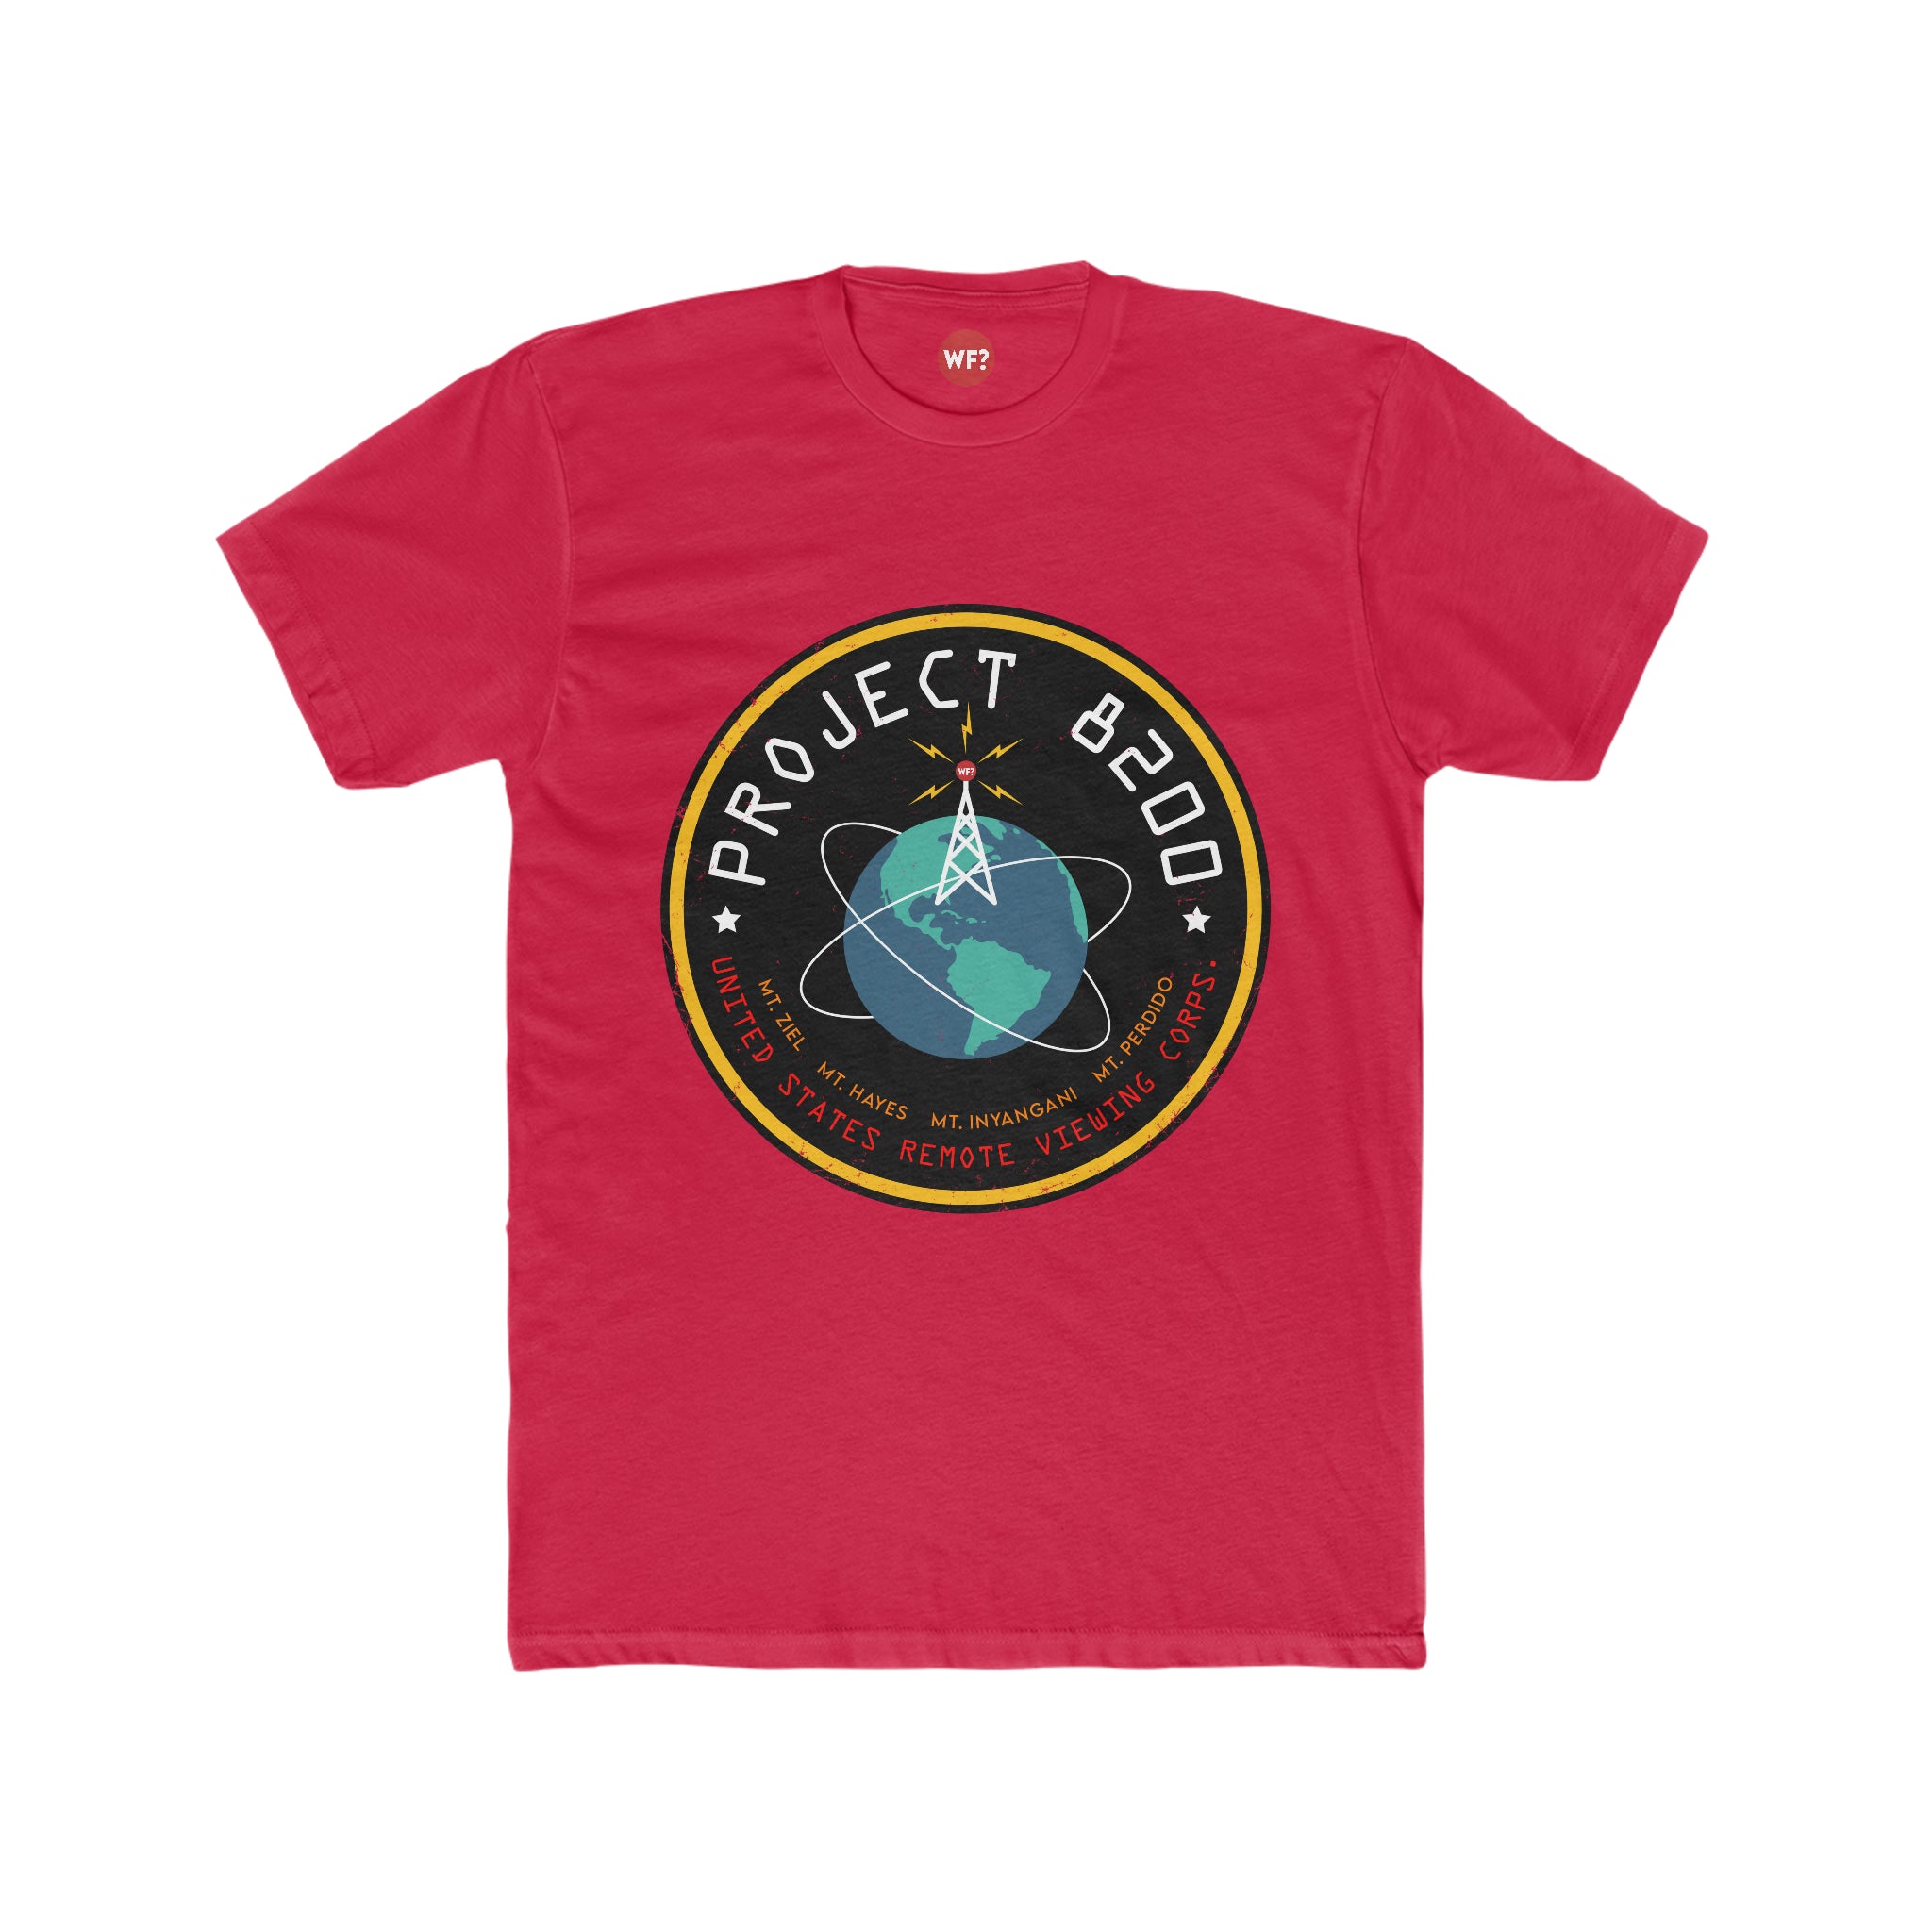 Buy solid-red Project 8200 Limited T-Shirt